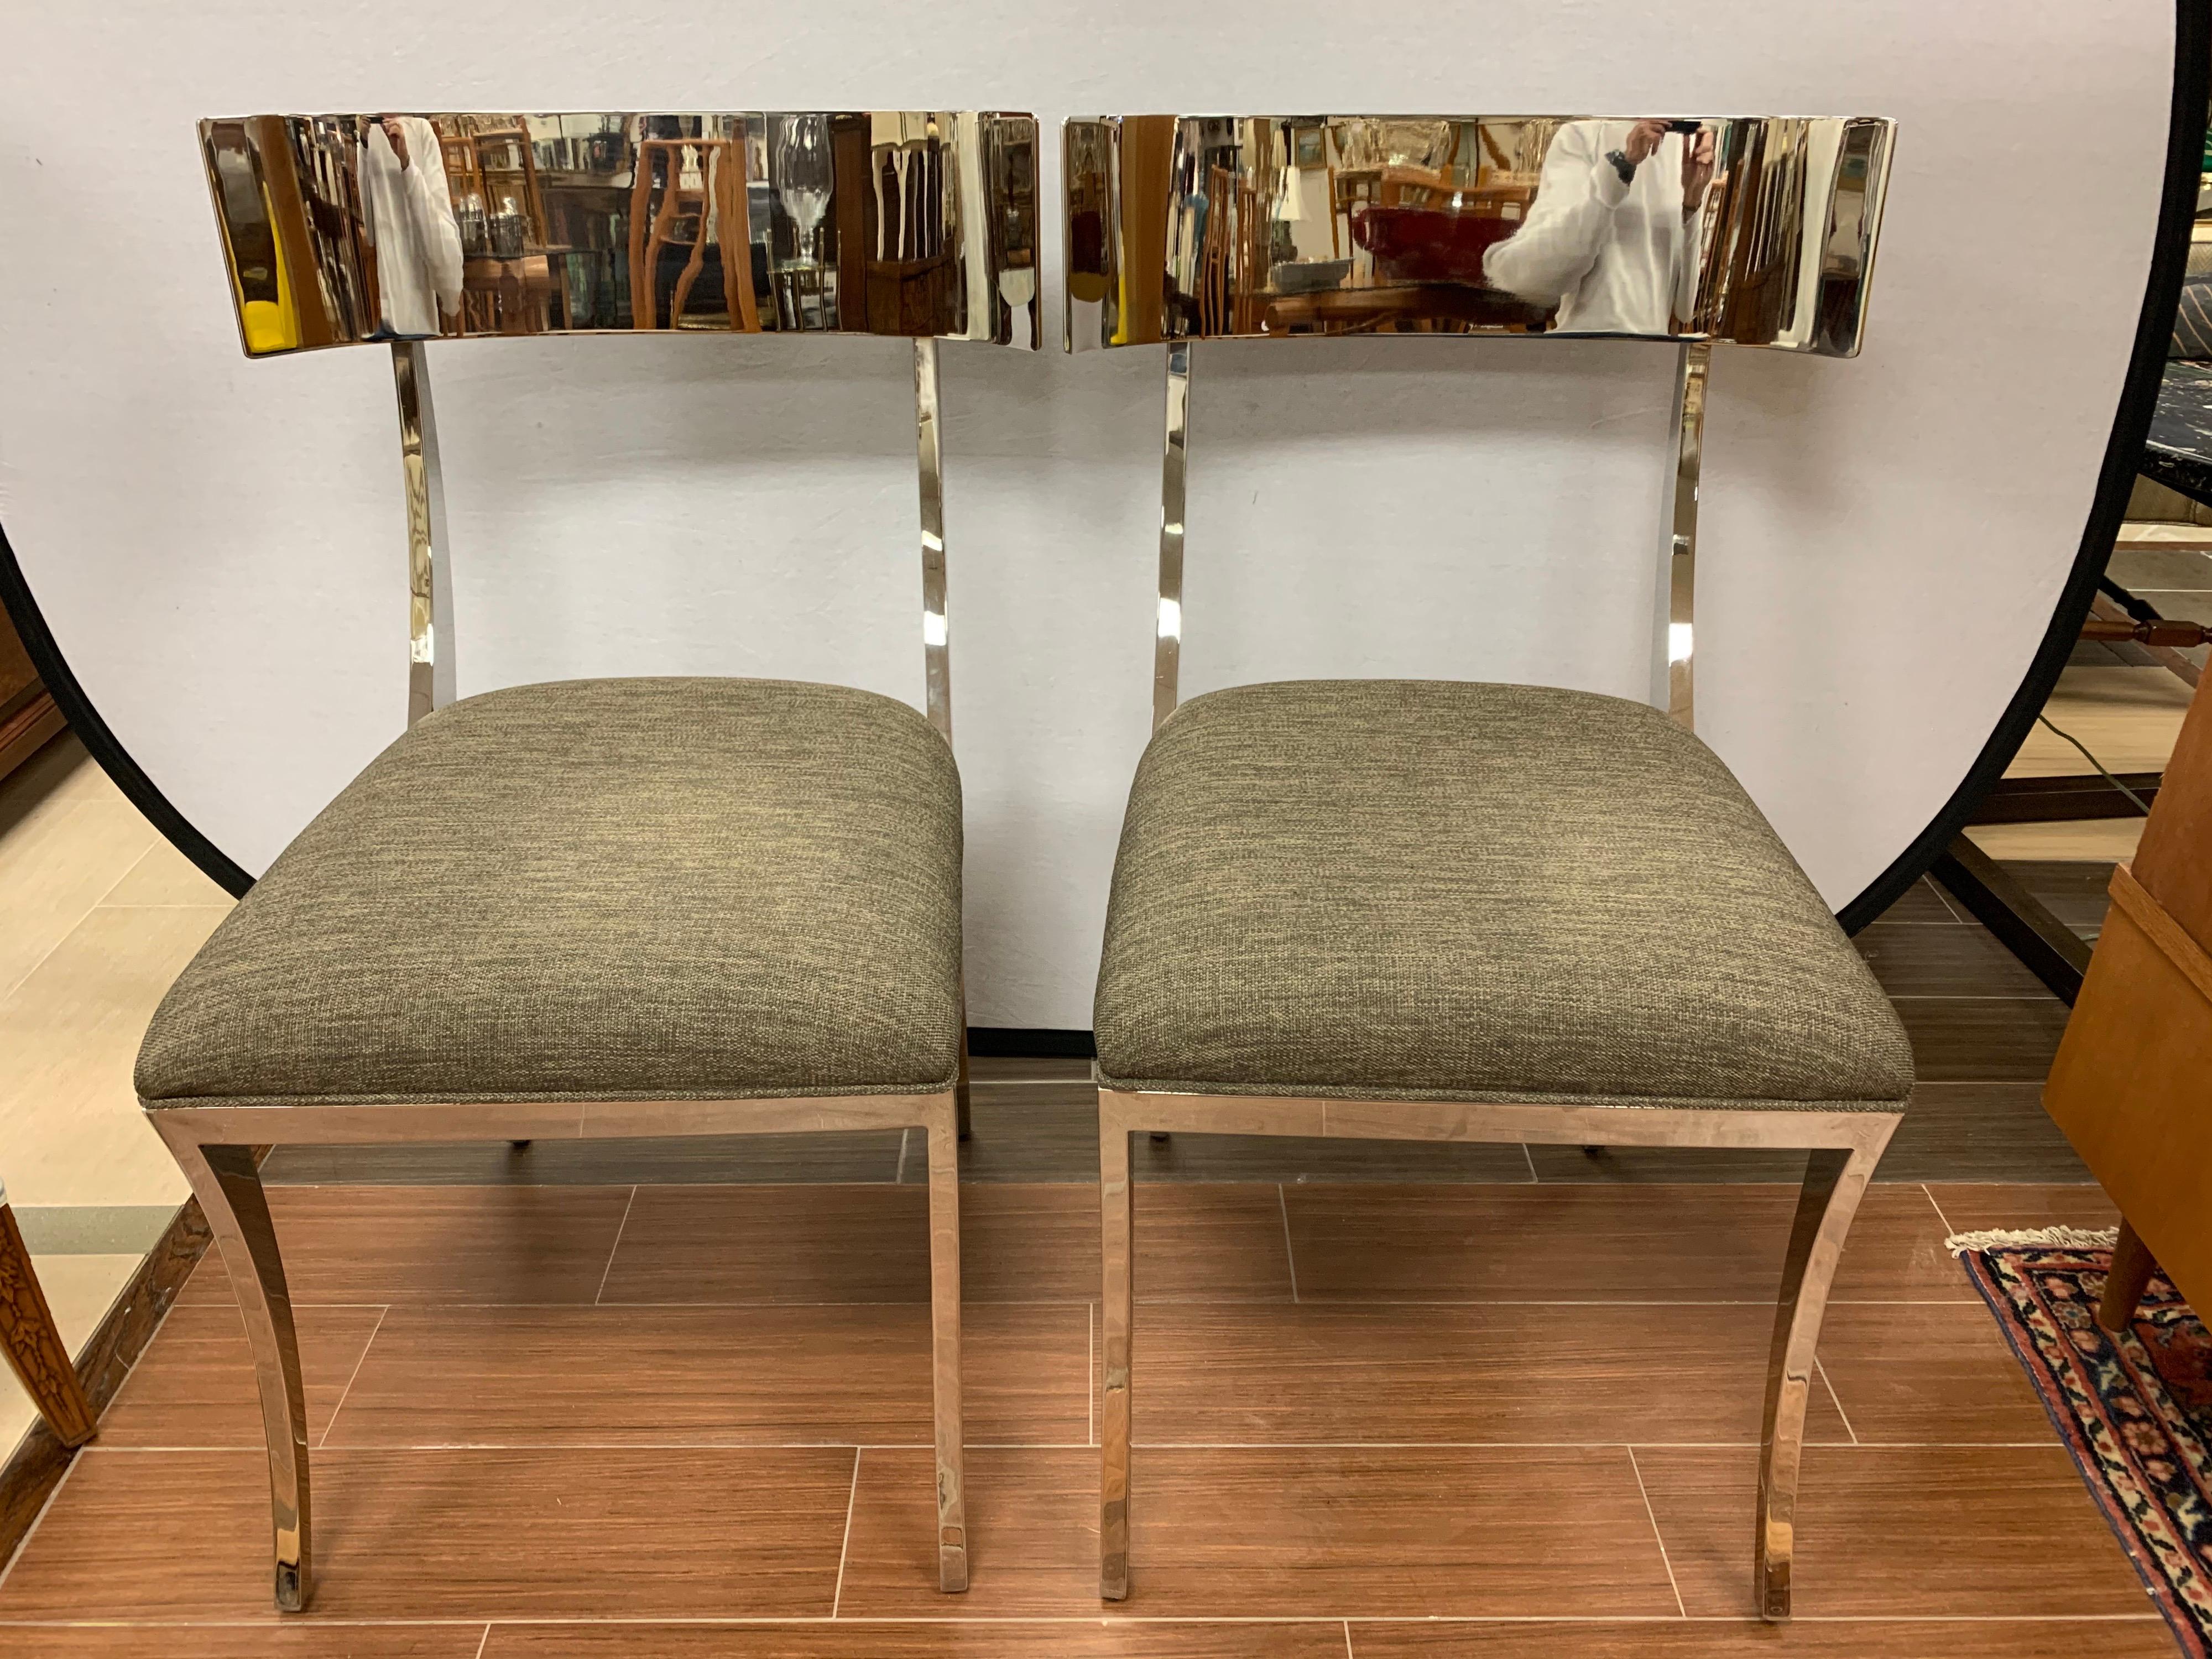 Elegant set of six chrome Klismos chairs, circa late 20th century, USA. Sleek neoclassical style polished chrome klismos chairs with upholstered dark gray linen seat. Sexy, beautiful curves and heavy, solid construction.